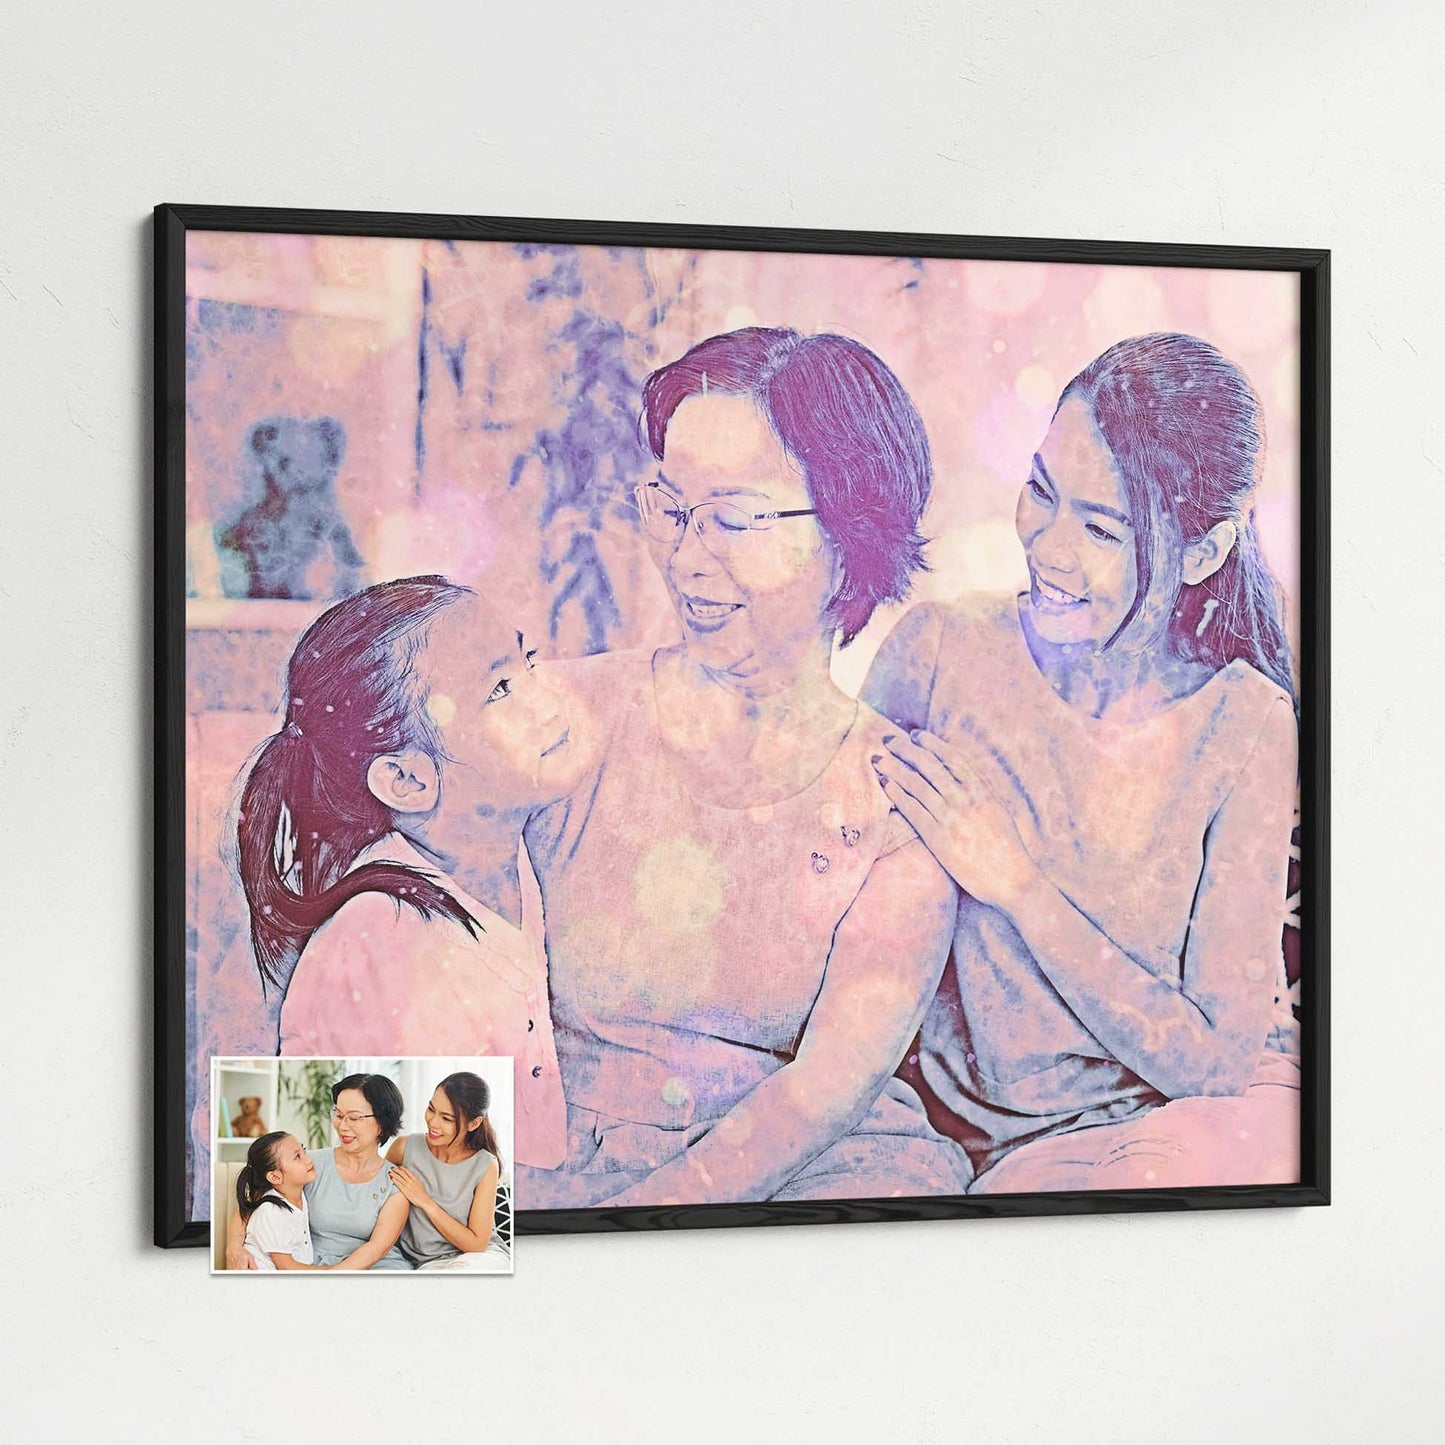 Personalised Special Purple FX Framed Print: Transform your cherished photo into a work of art. The stunning bokeh effect and vibrant colors make this piece truly special. Printed on gallery-quality paper and framed with care